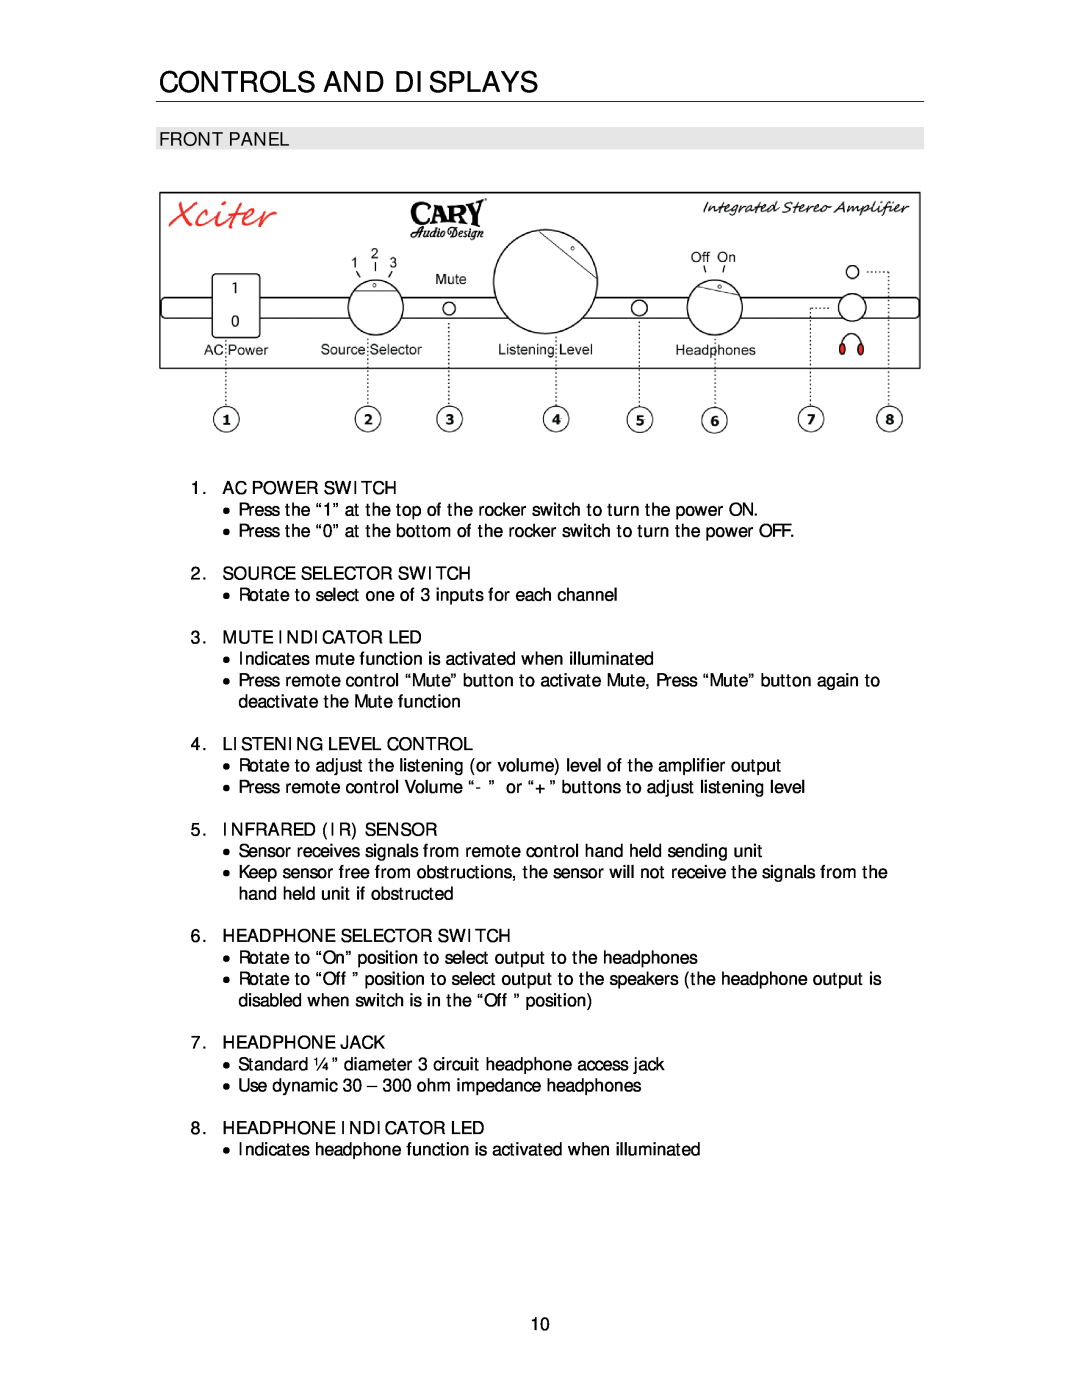 Cary Audio Design Xciter owner manual Controls And Displays, Front Panel 